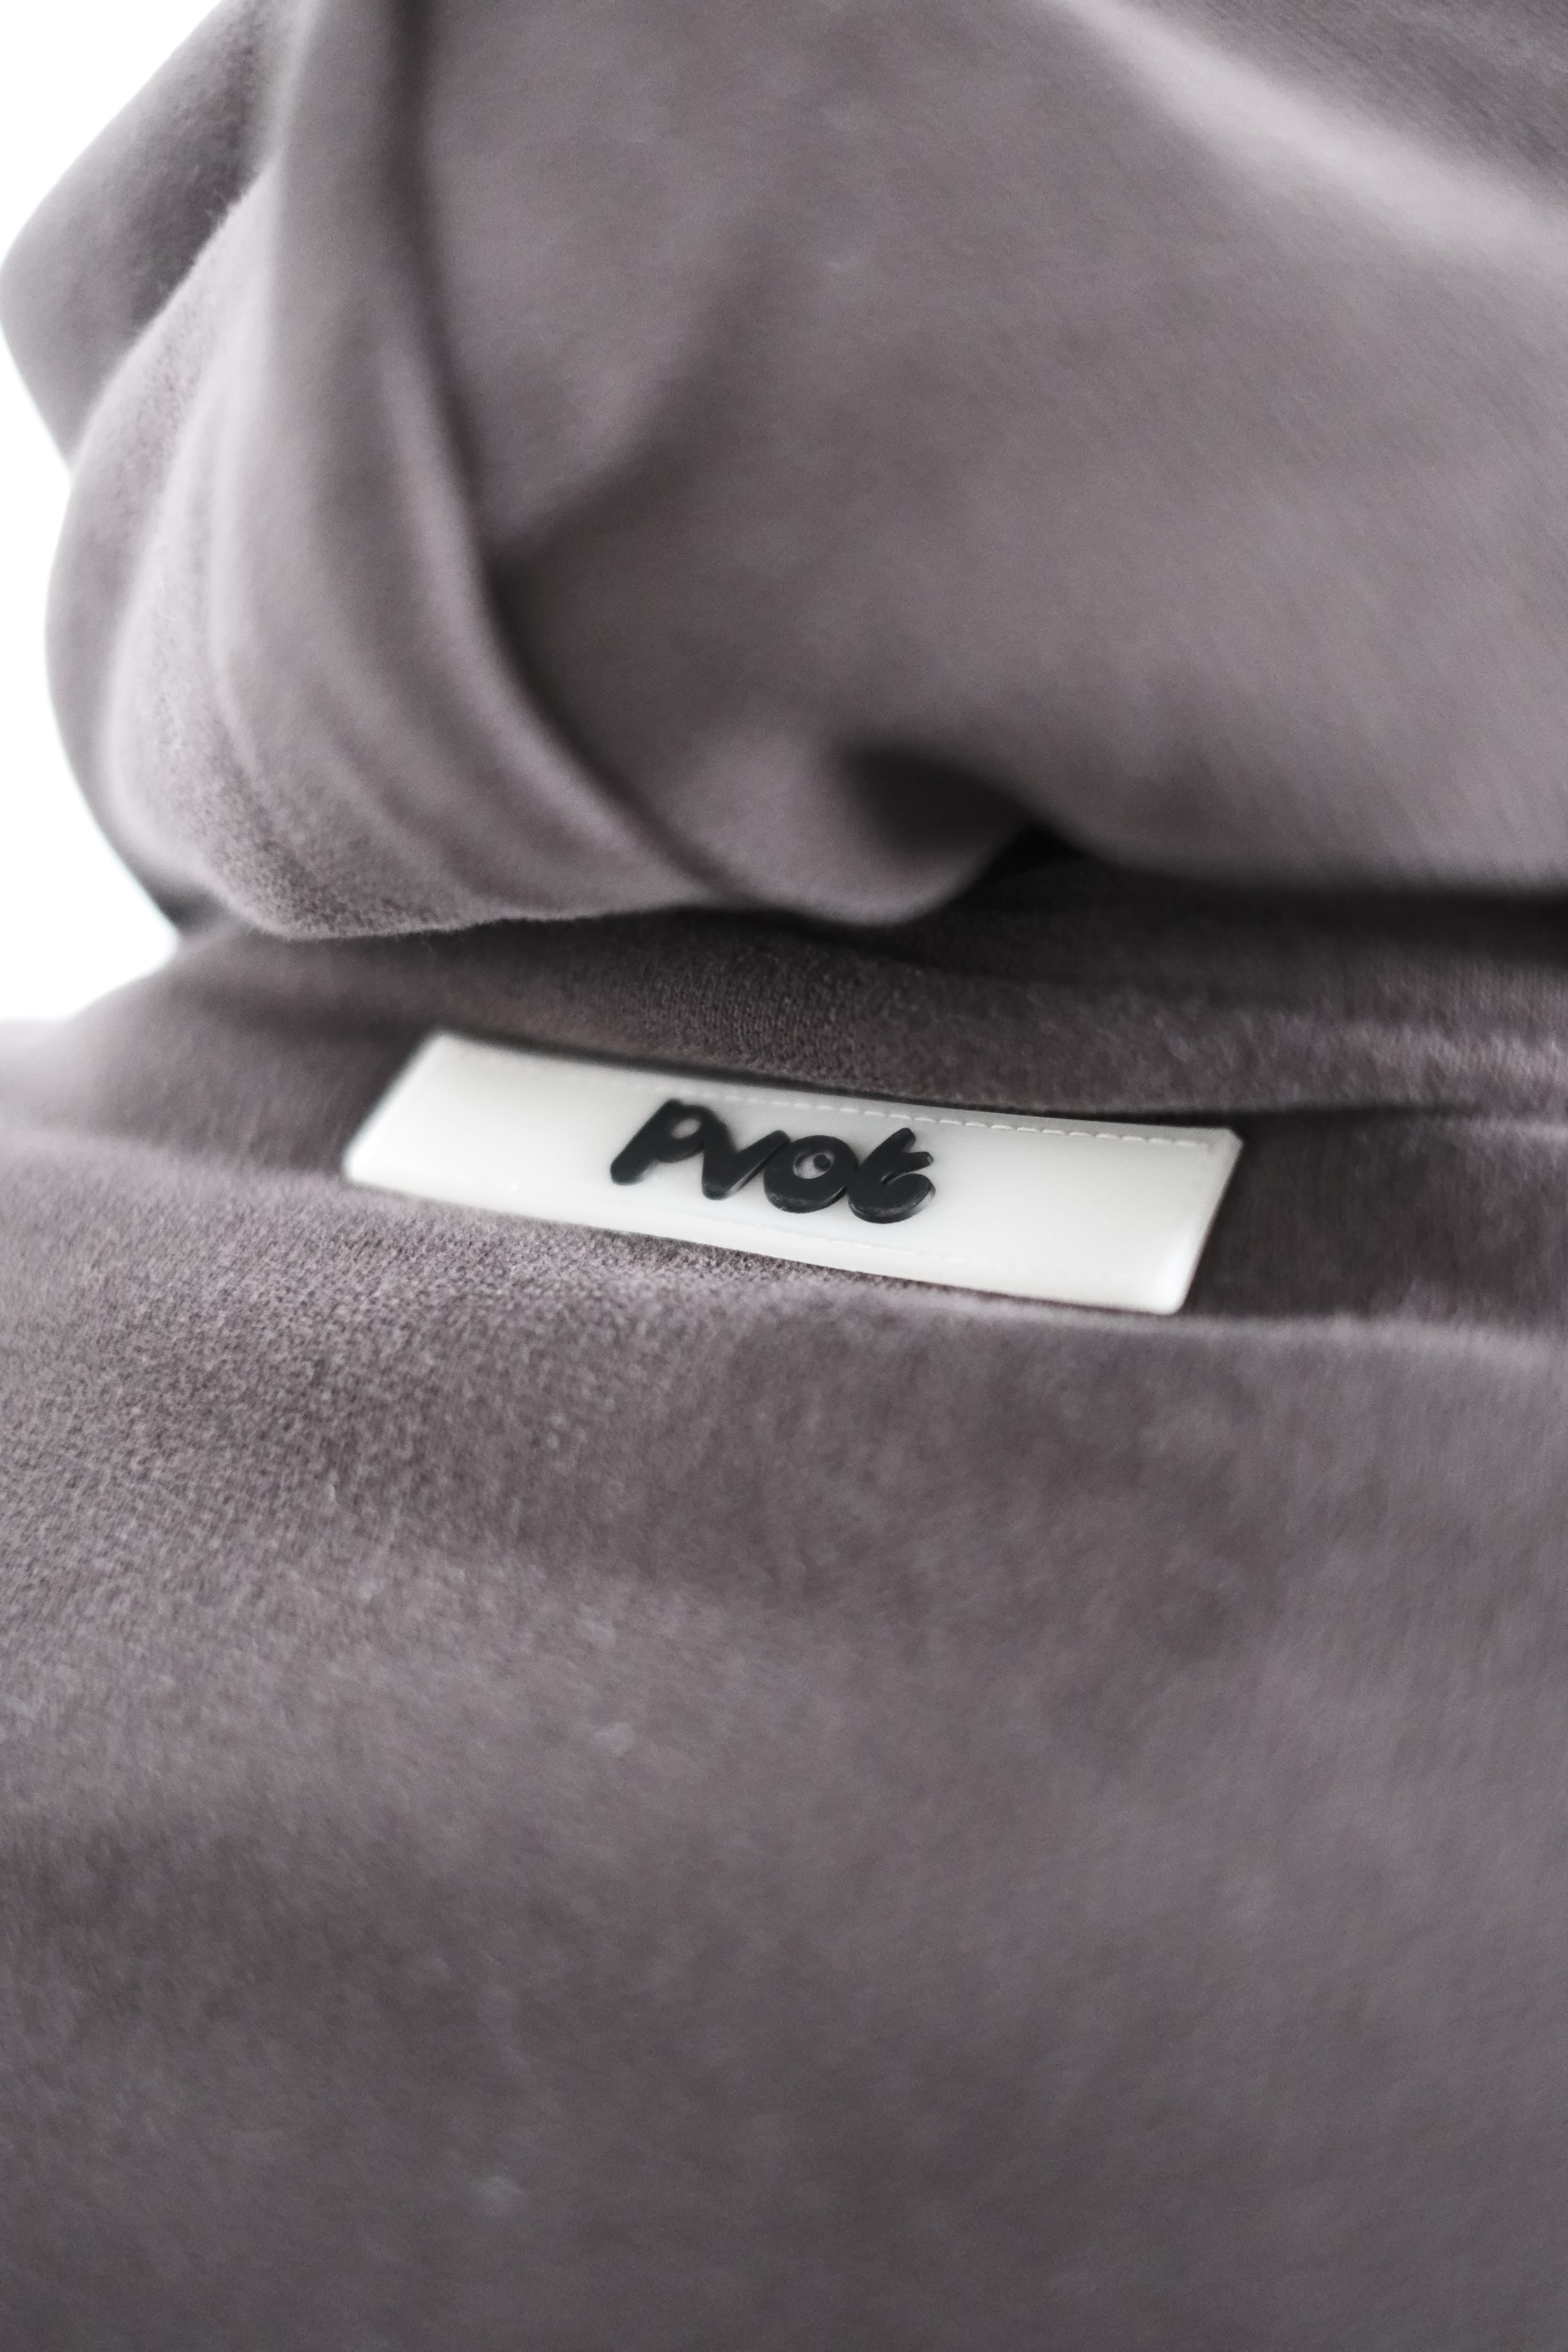 Pvot Athleisure Hoodie (Charcoal Brown)